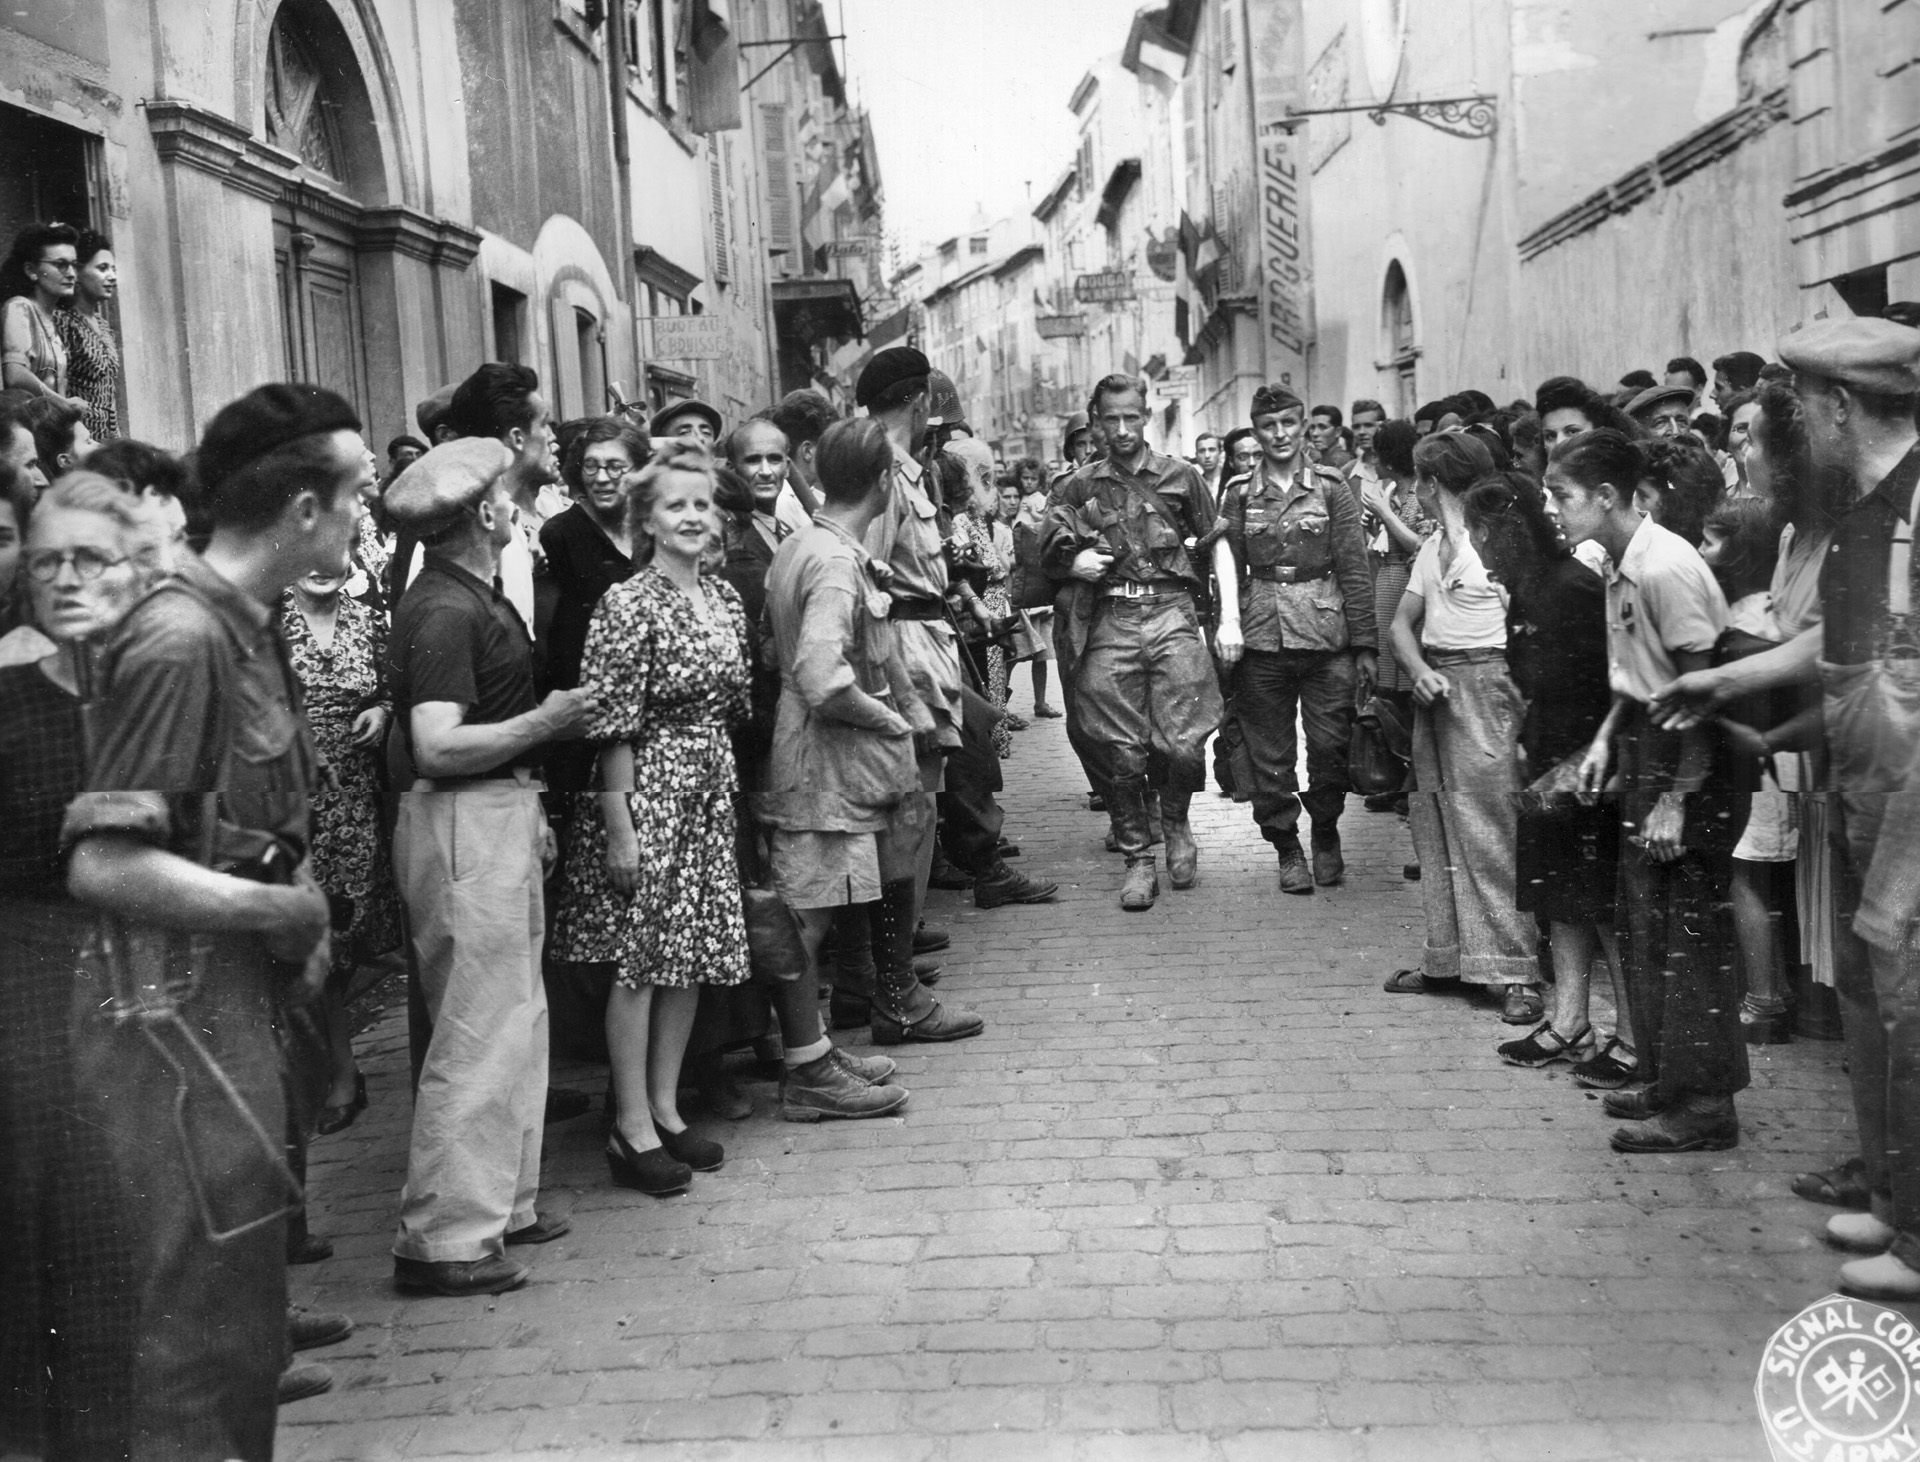 German snipers, disarmed and taken alive, are marched down a street in Montelimar while a crowd of townspeople looks on. 